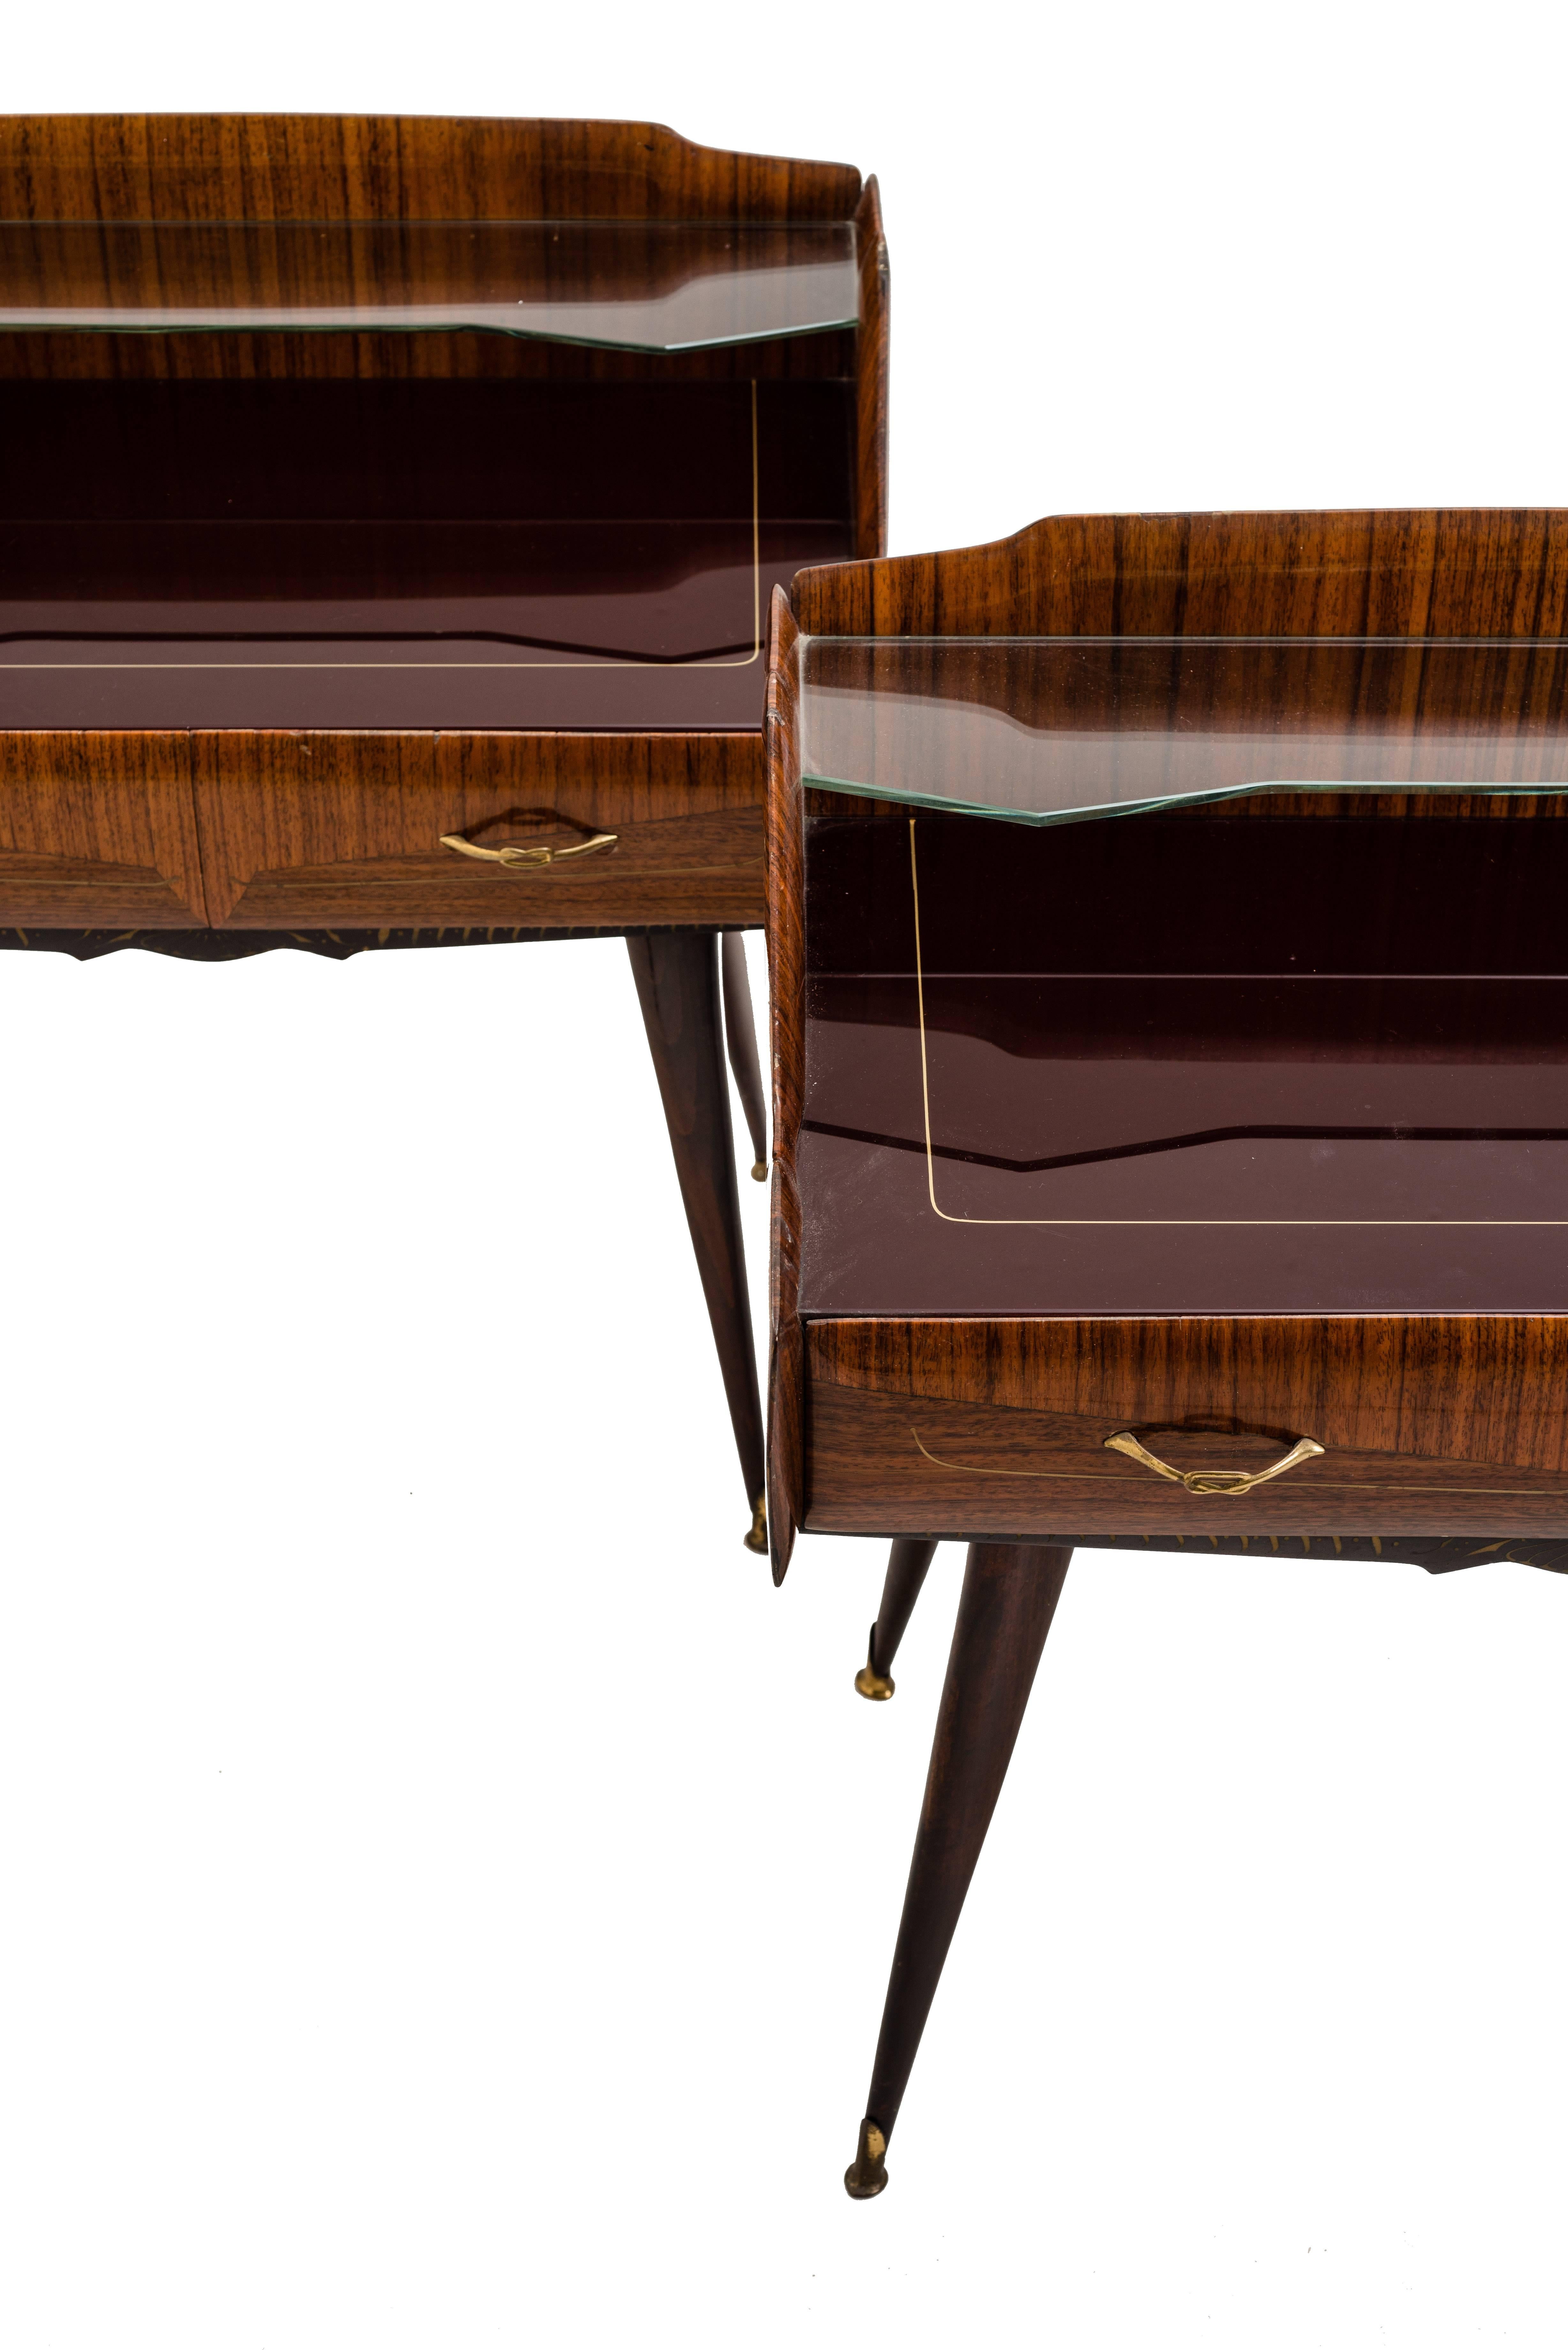 Pair of remarkable bedsides rosewood in the style of Paolo Buffa, 1950s.

